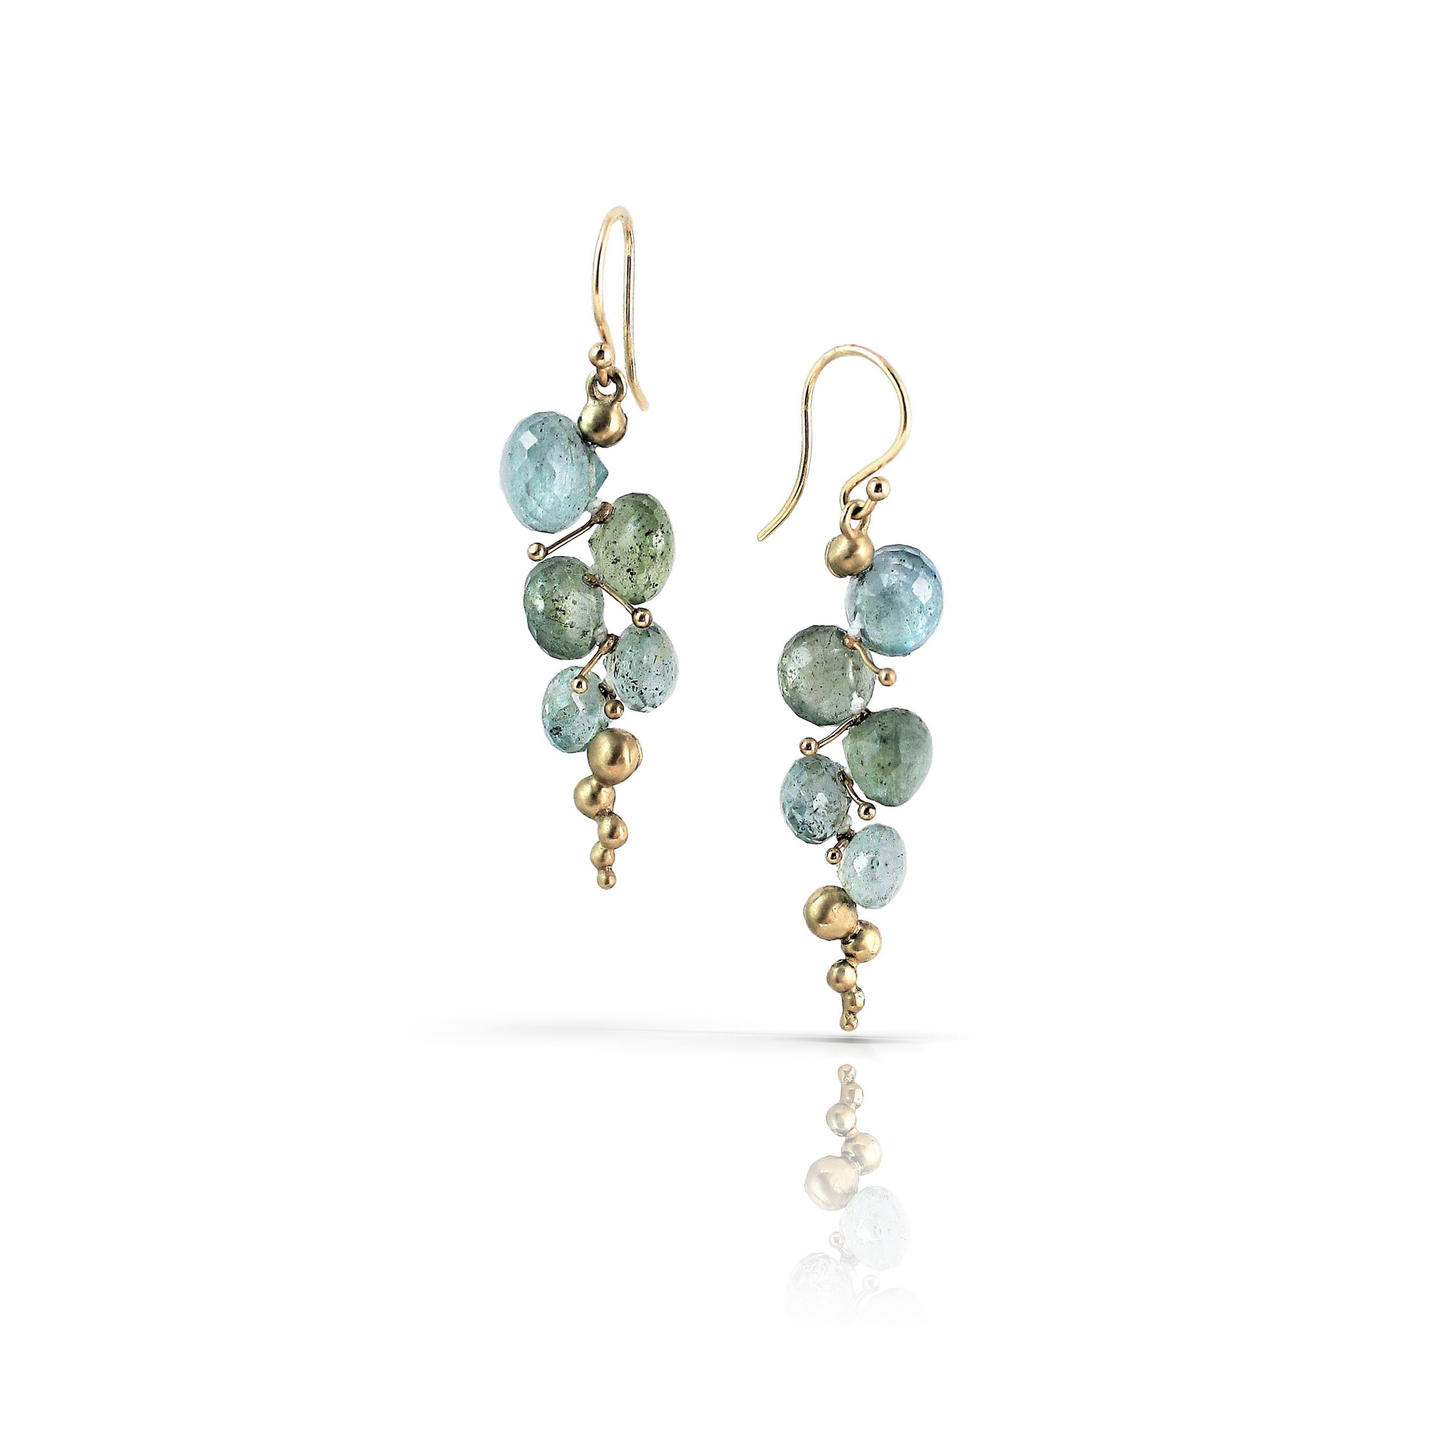 Small Caviar Earrings in 14k Yellow Gold and Moss Aquamarines